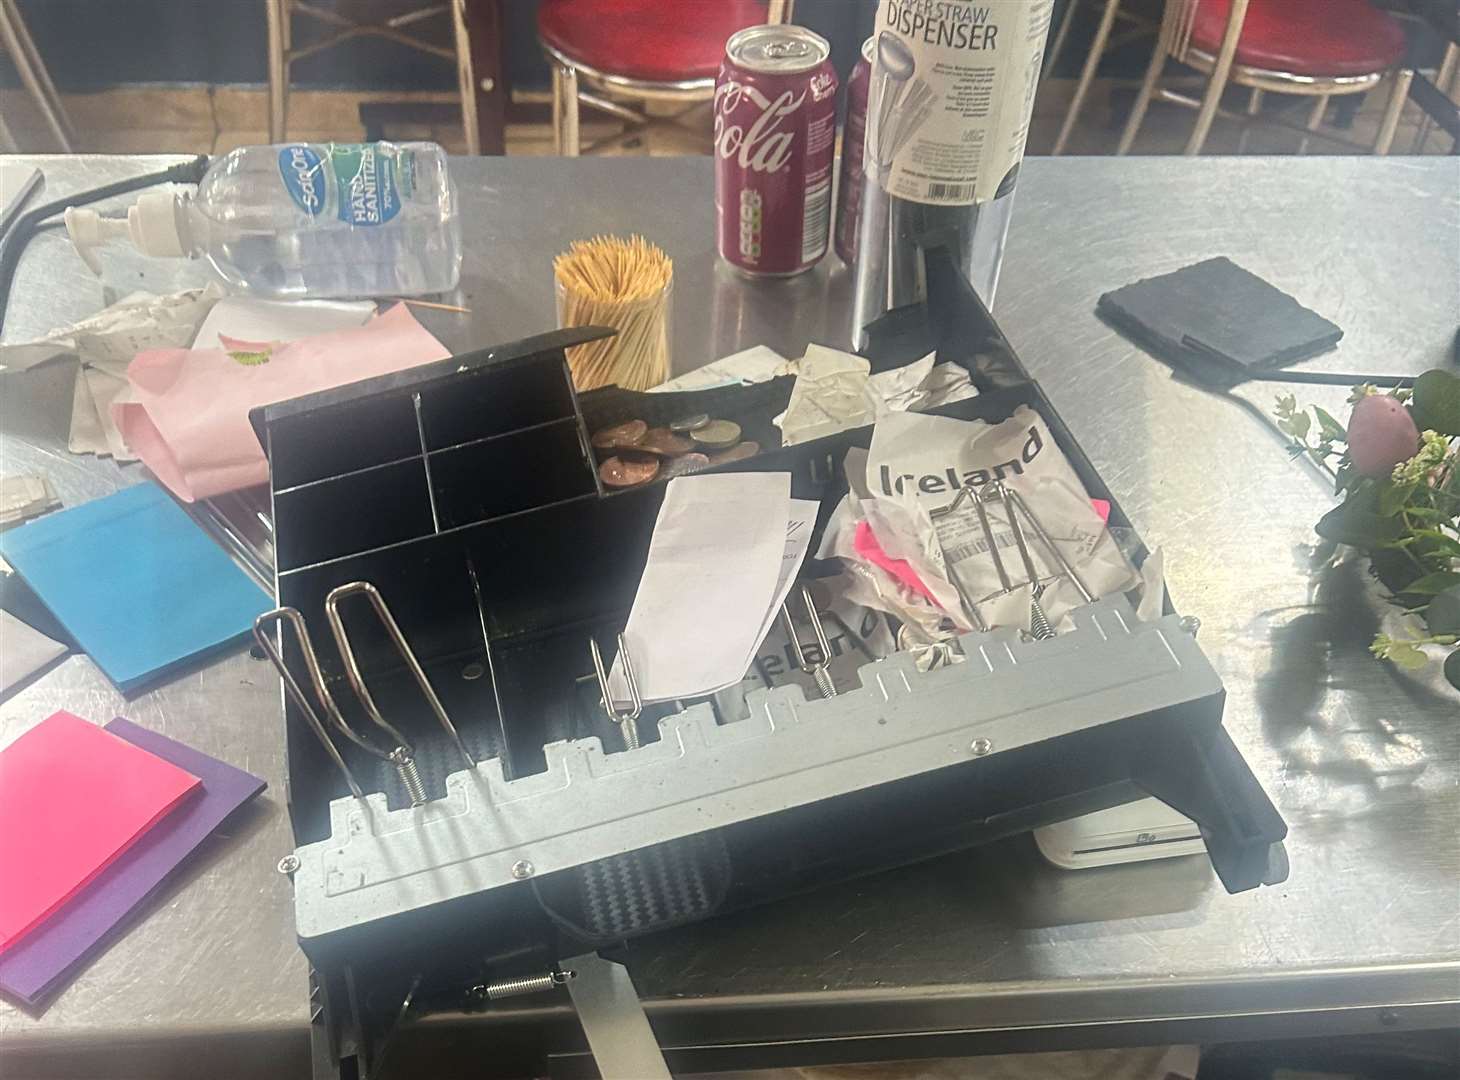 Parts of the till were scattered across the coffee shop by thieves during the break-in at The Gorge cafe. Picture: Fahir Karaoglan